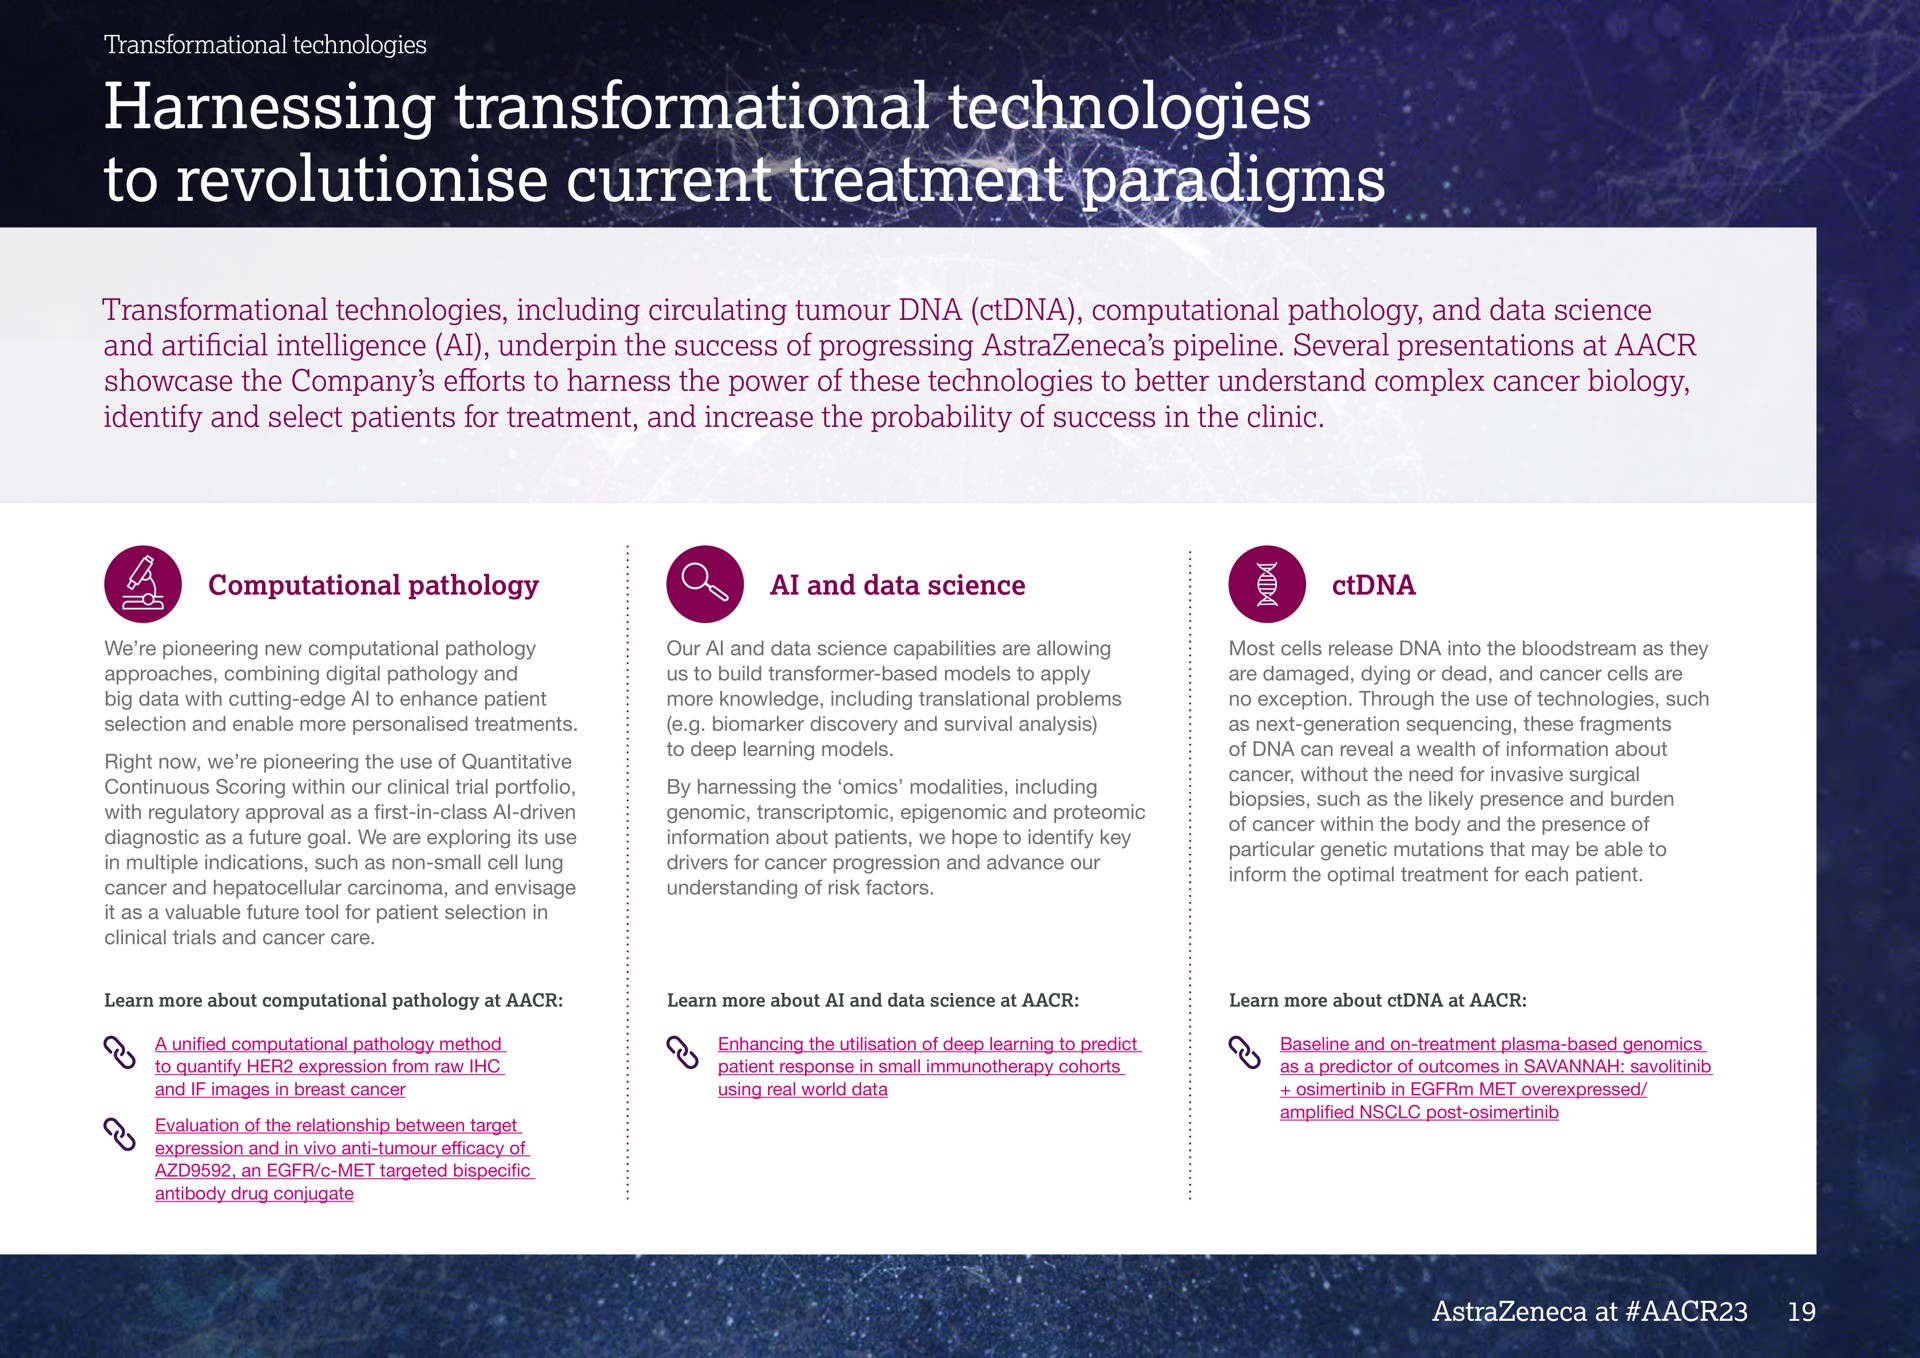 harnessing technologies to current treatment paradigms | AstraZeneca